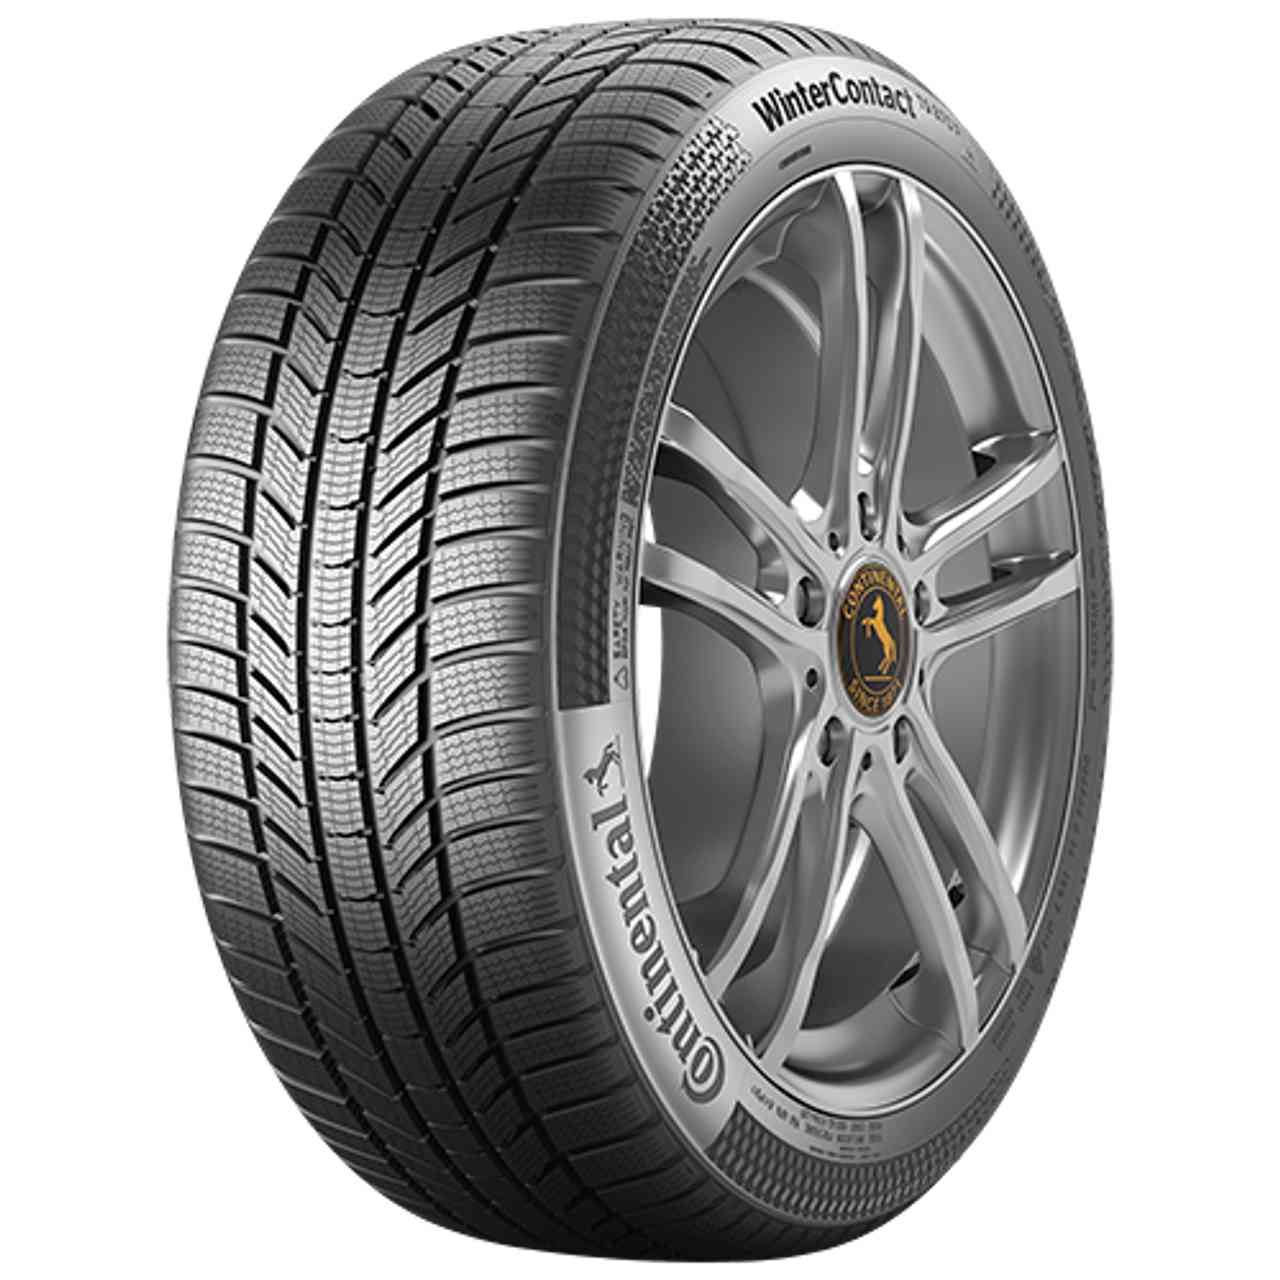 CONTINENTAL WINTERCONTACT TS 870 P (EVc) 205/45R17 88V FR BSW